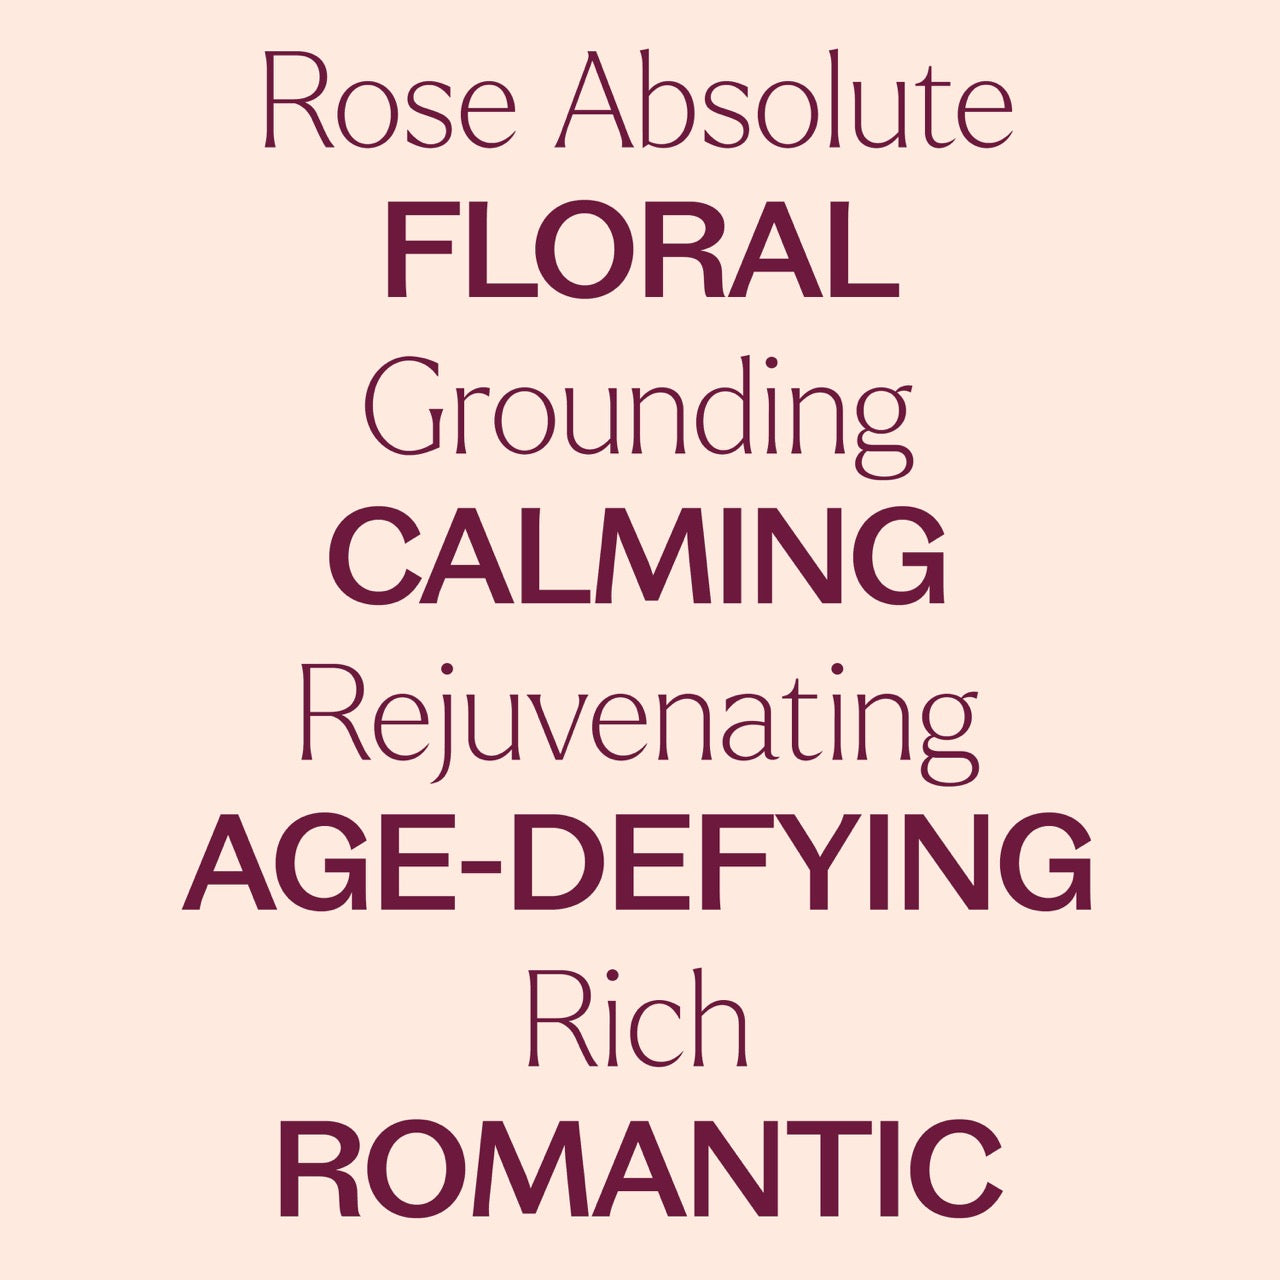 rose absolute essential oil key features: floral, grounding, calming, rejuvenating, age-defying, rich, romantic